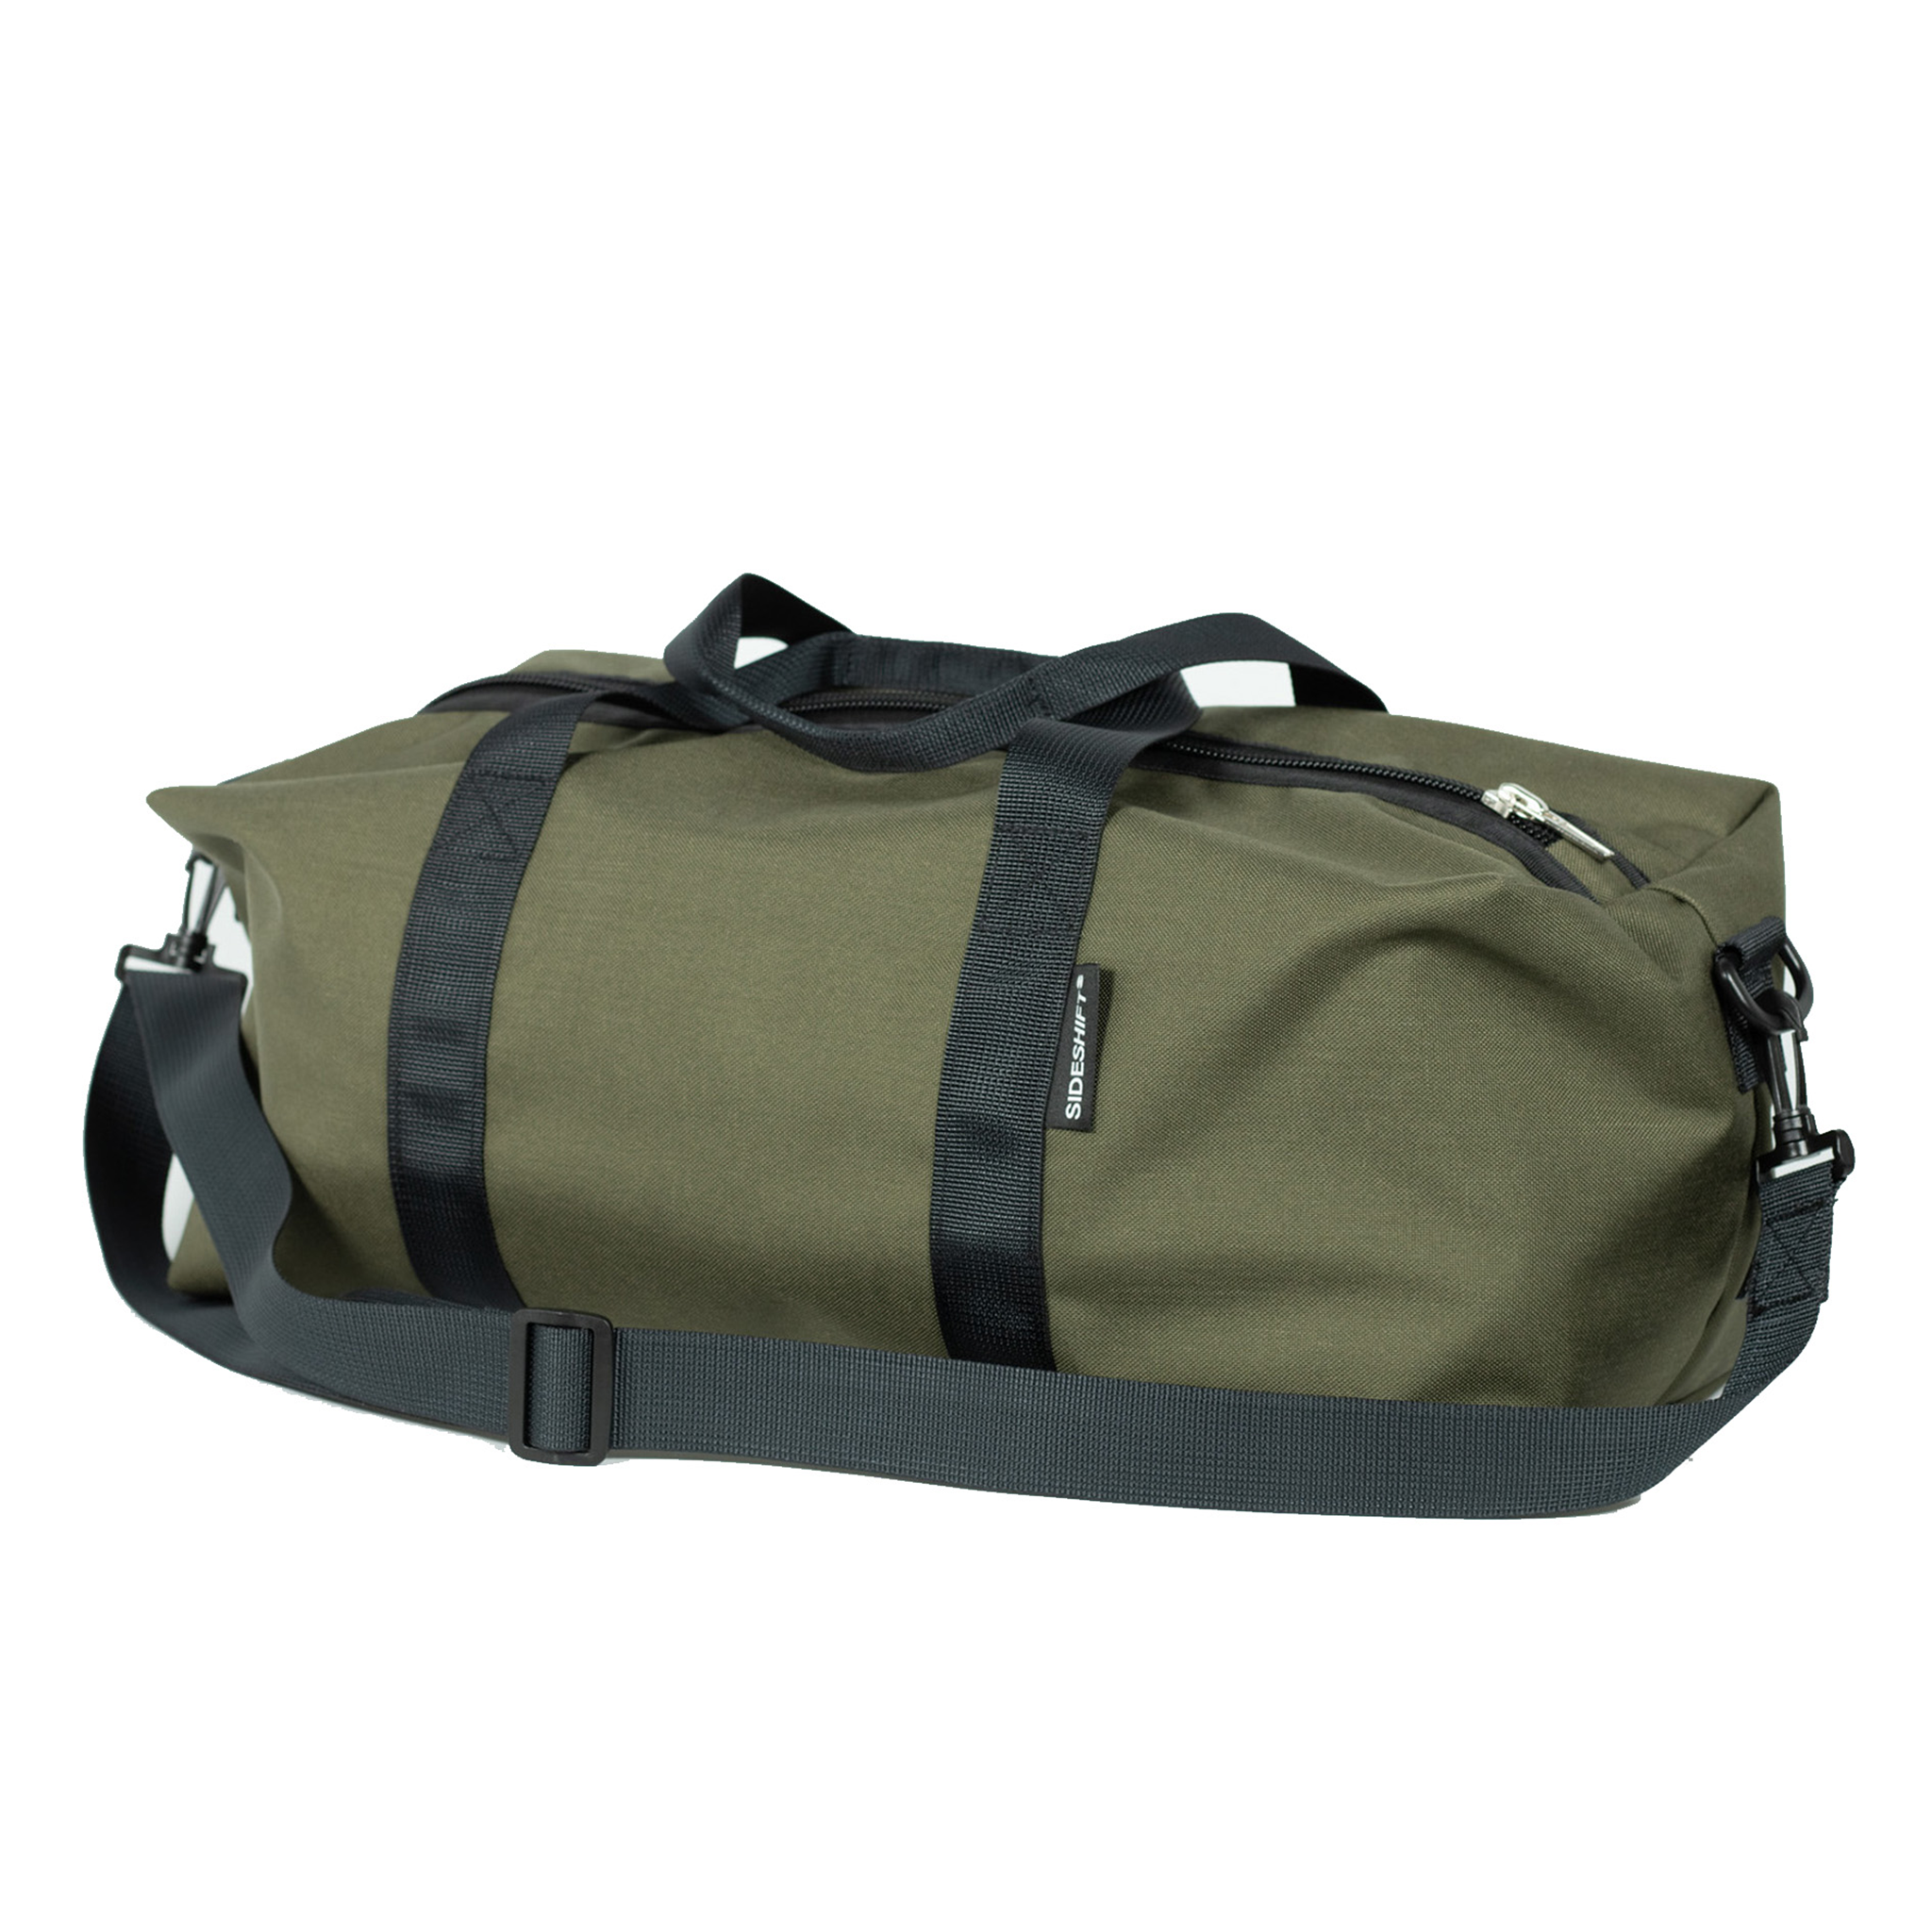 Quickchange Duffel 20L (Limited monthly release - RGRN/BLK)